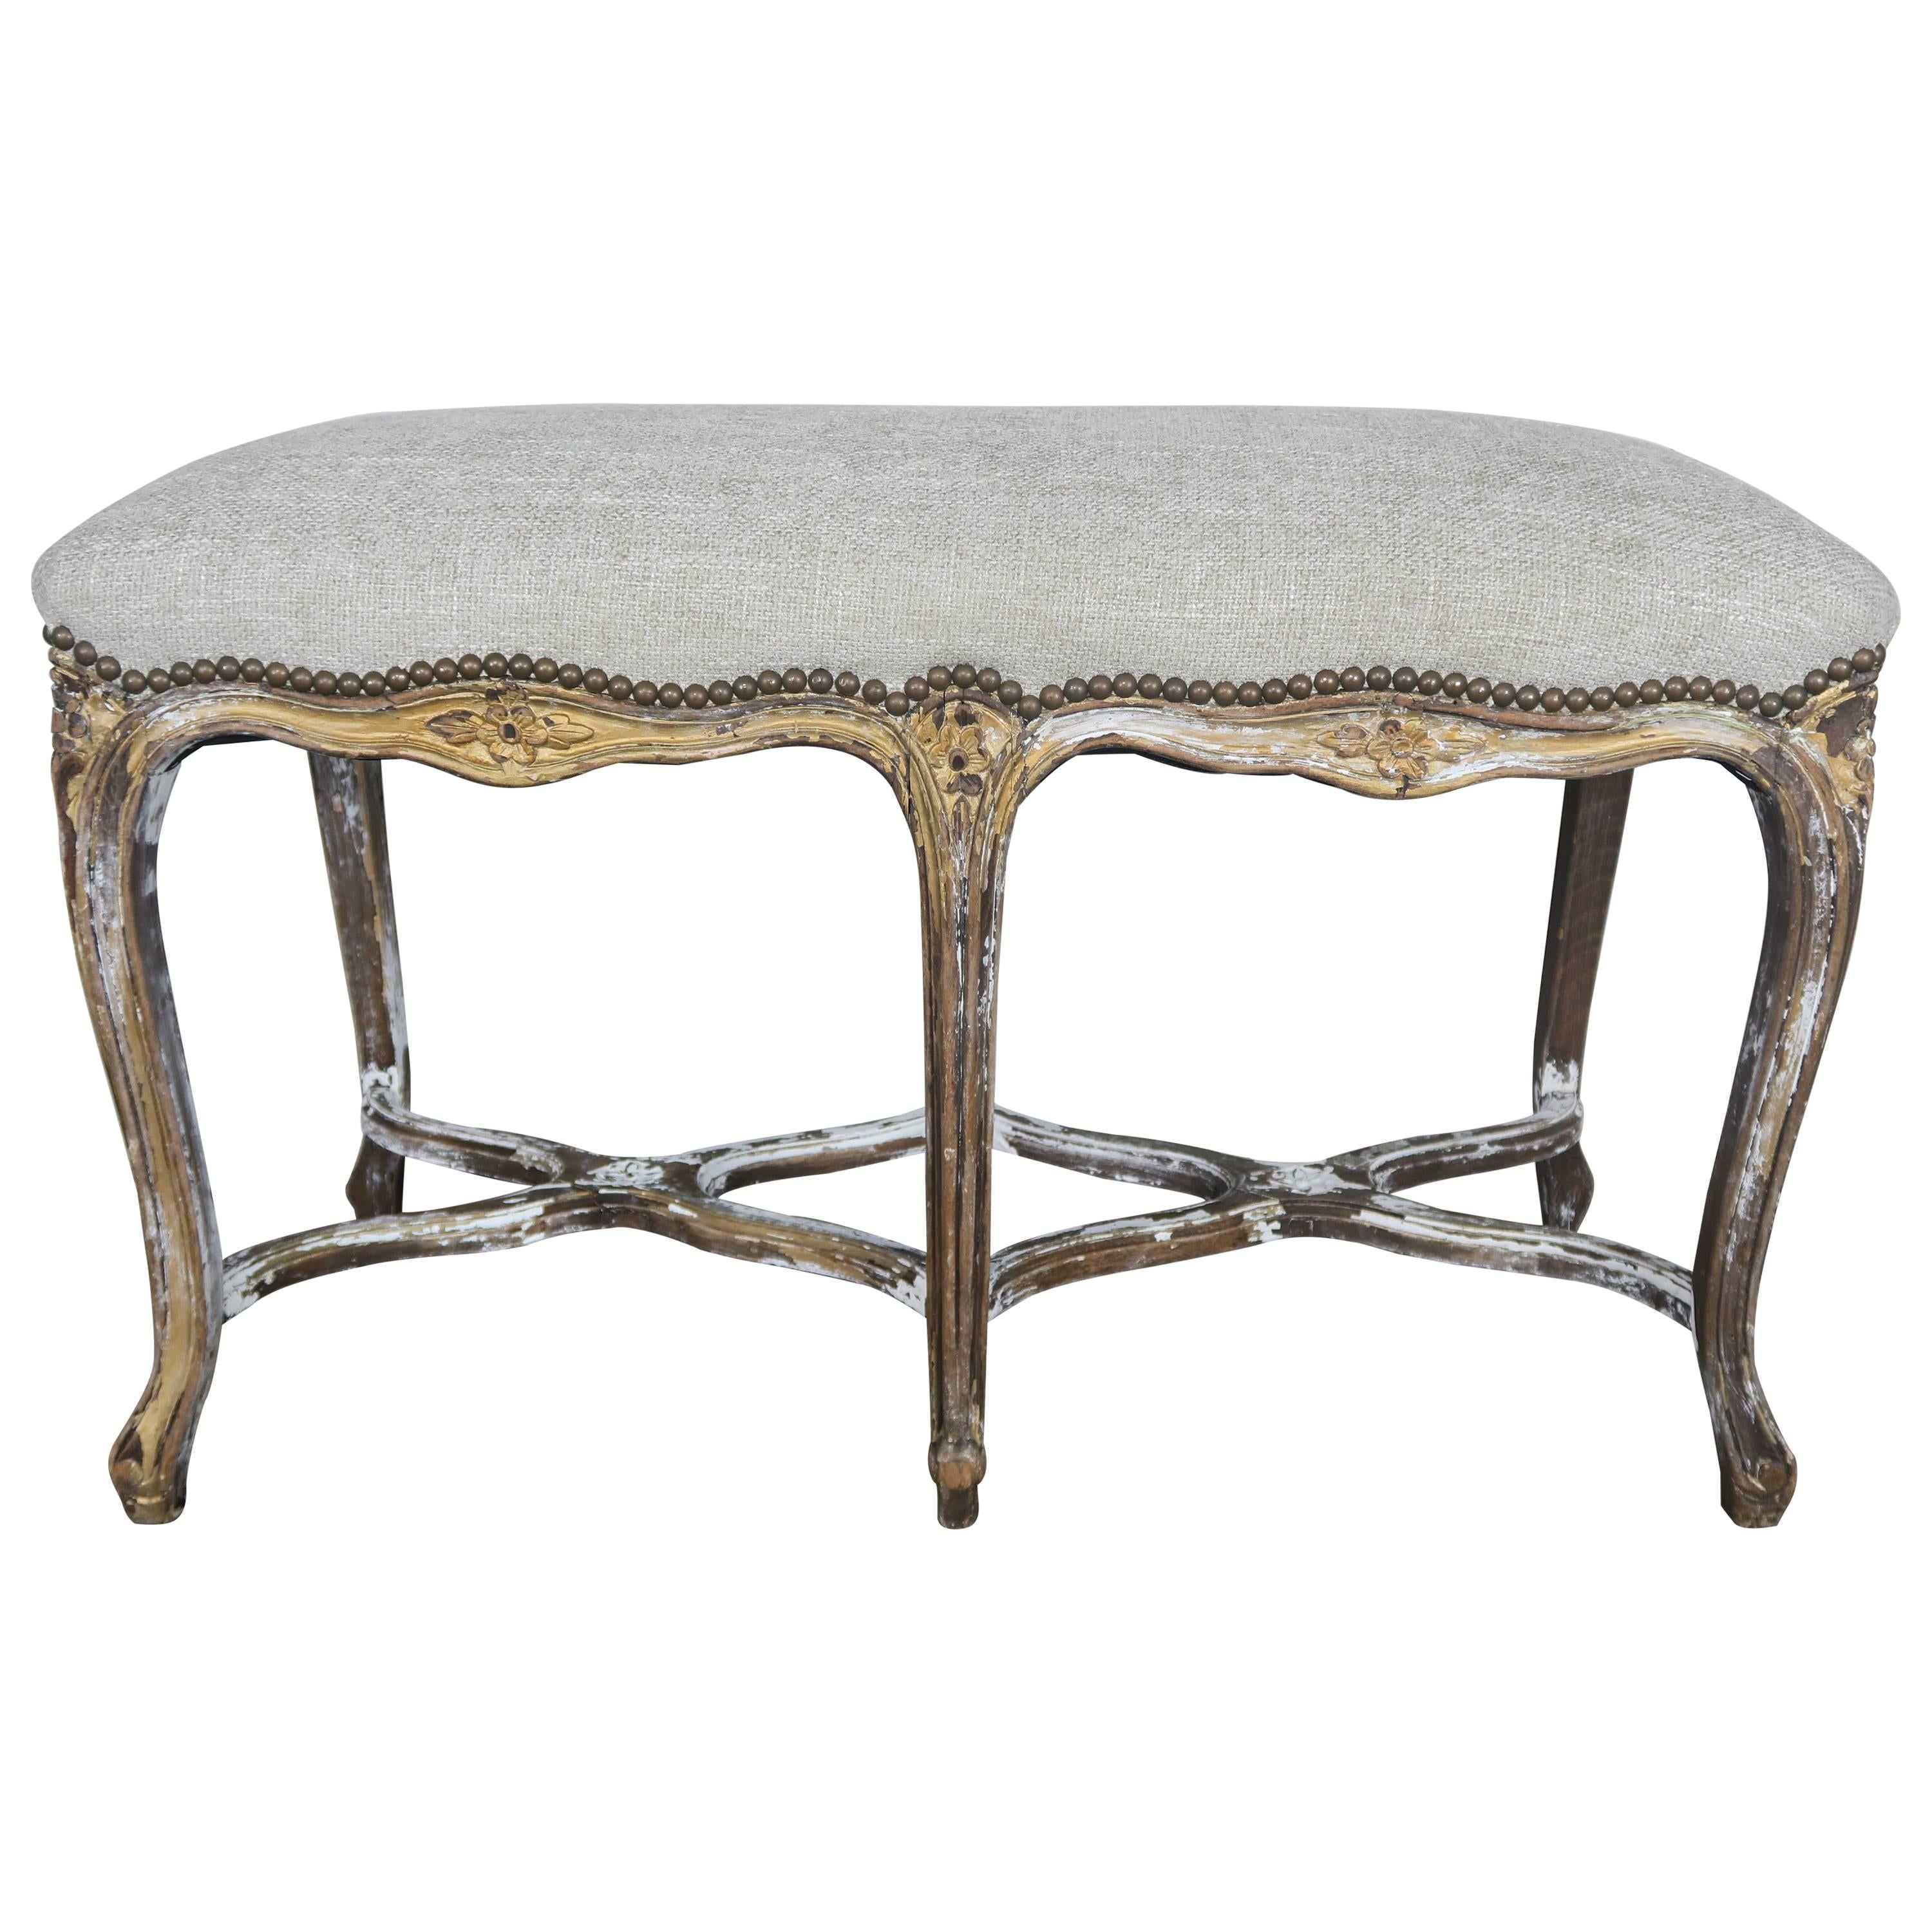 French Louis XV Style Giltwood Bench